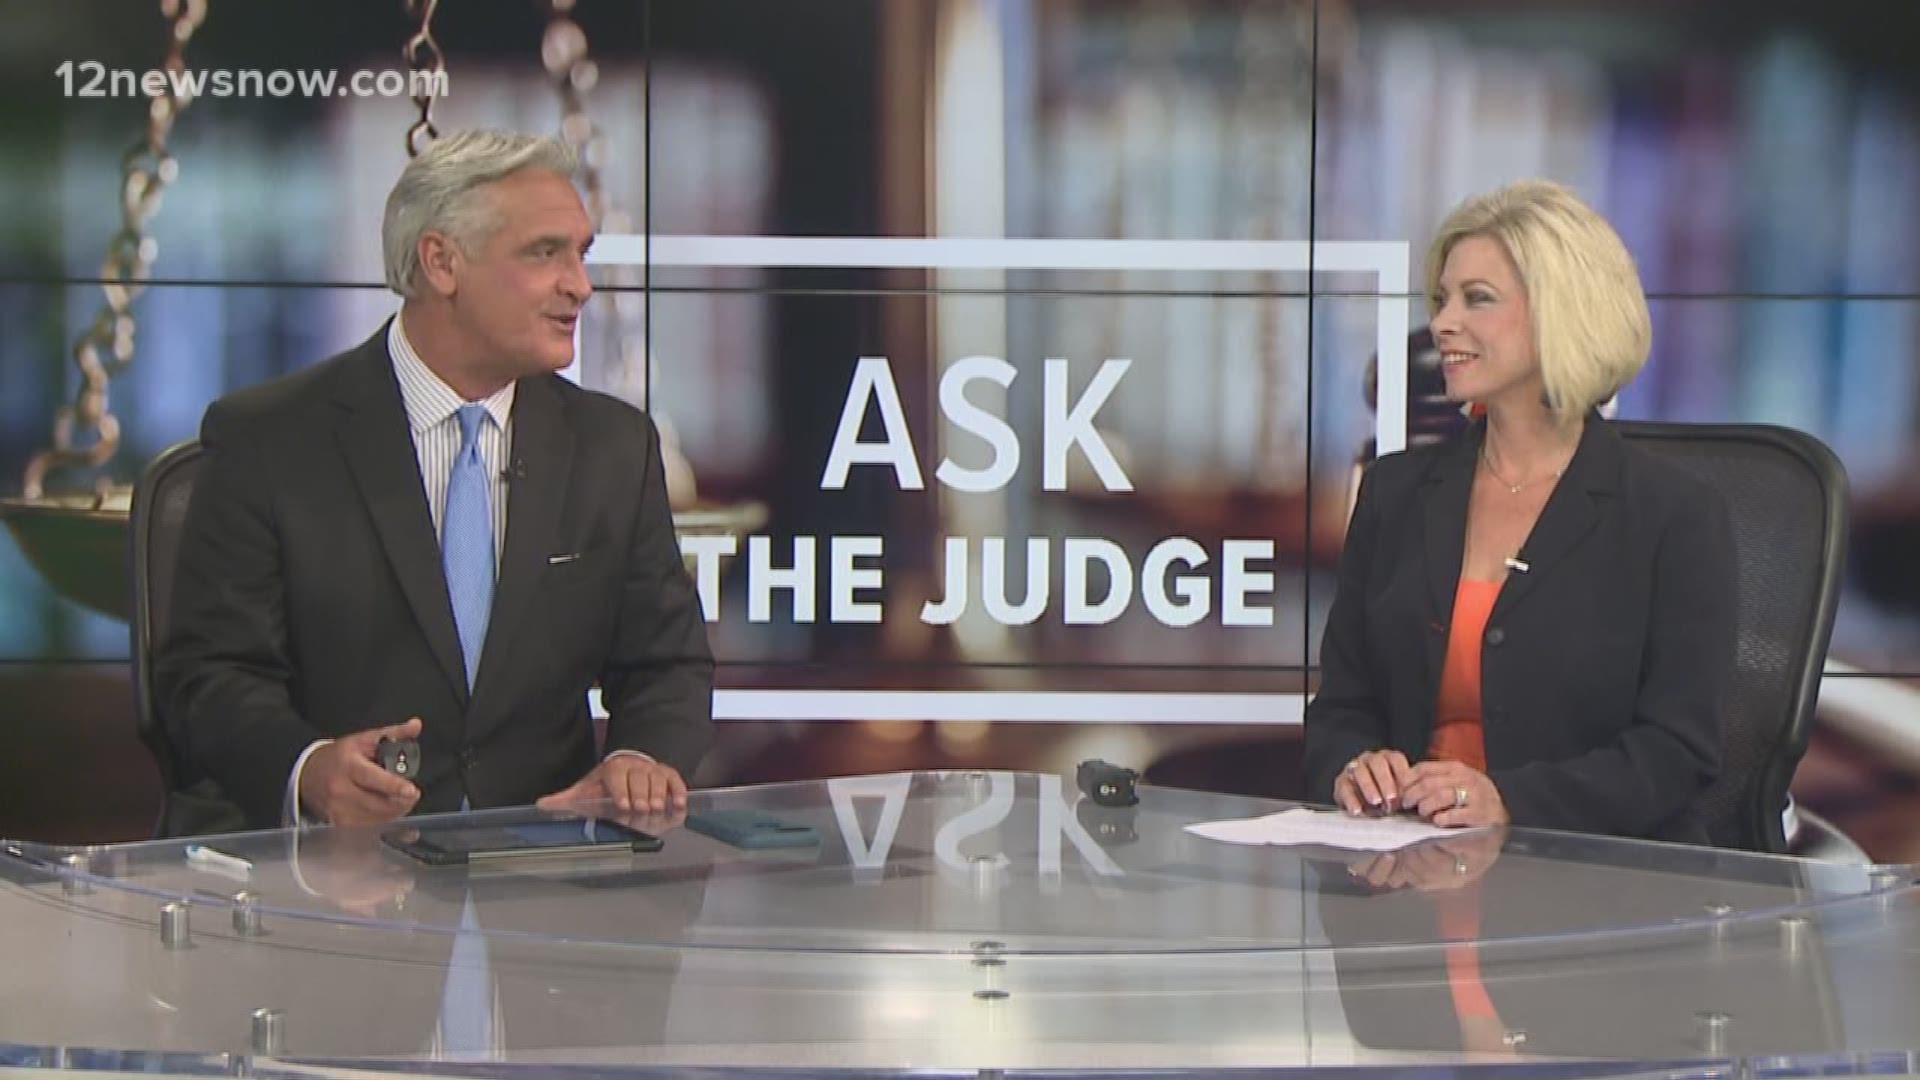 Visit 12NewsNow.com/askthejudge to submit your legal questions.